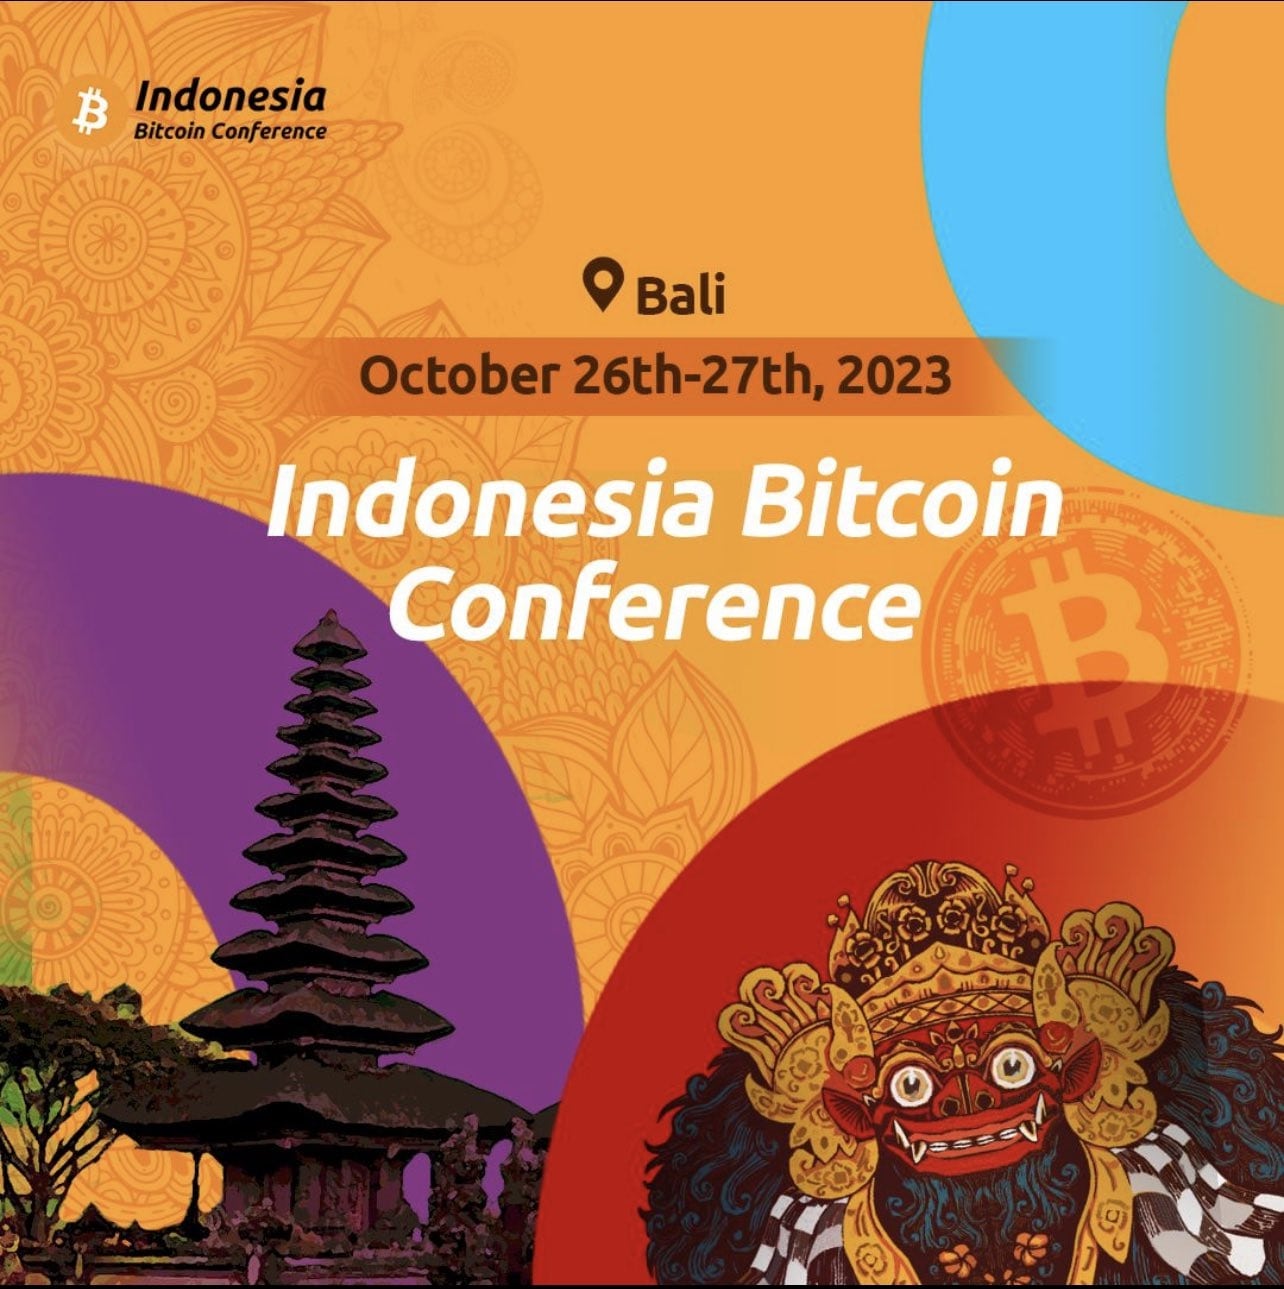 Mark your calendar: Bitcoin is coming to Bali / Indonesia!